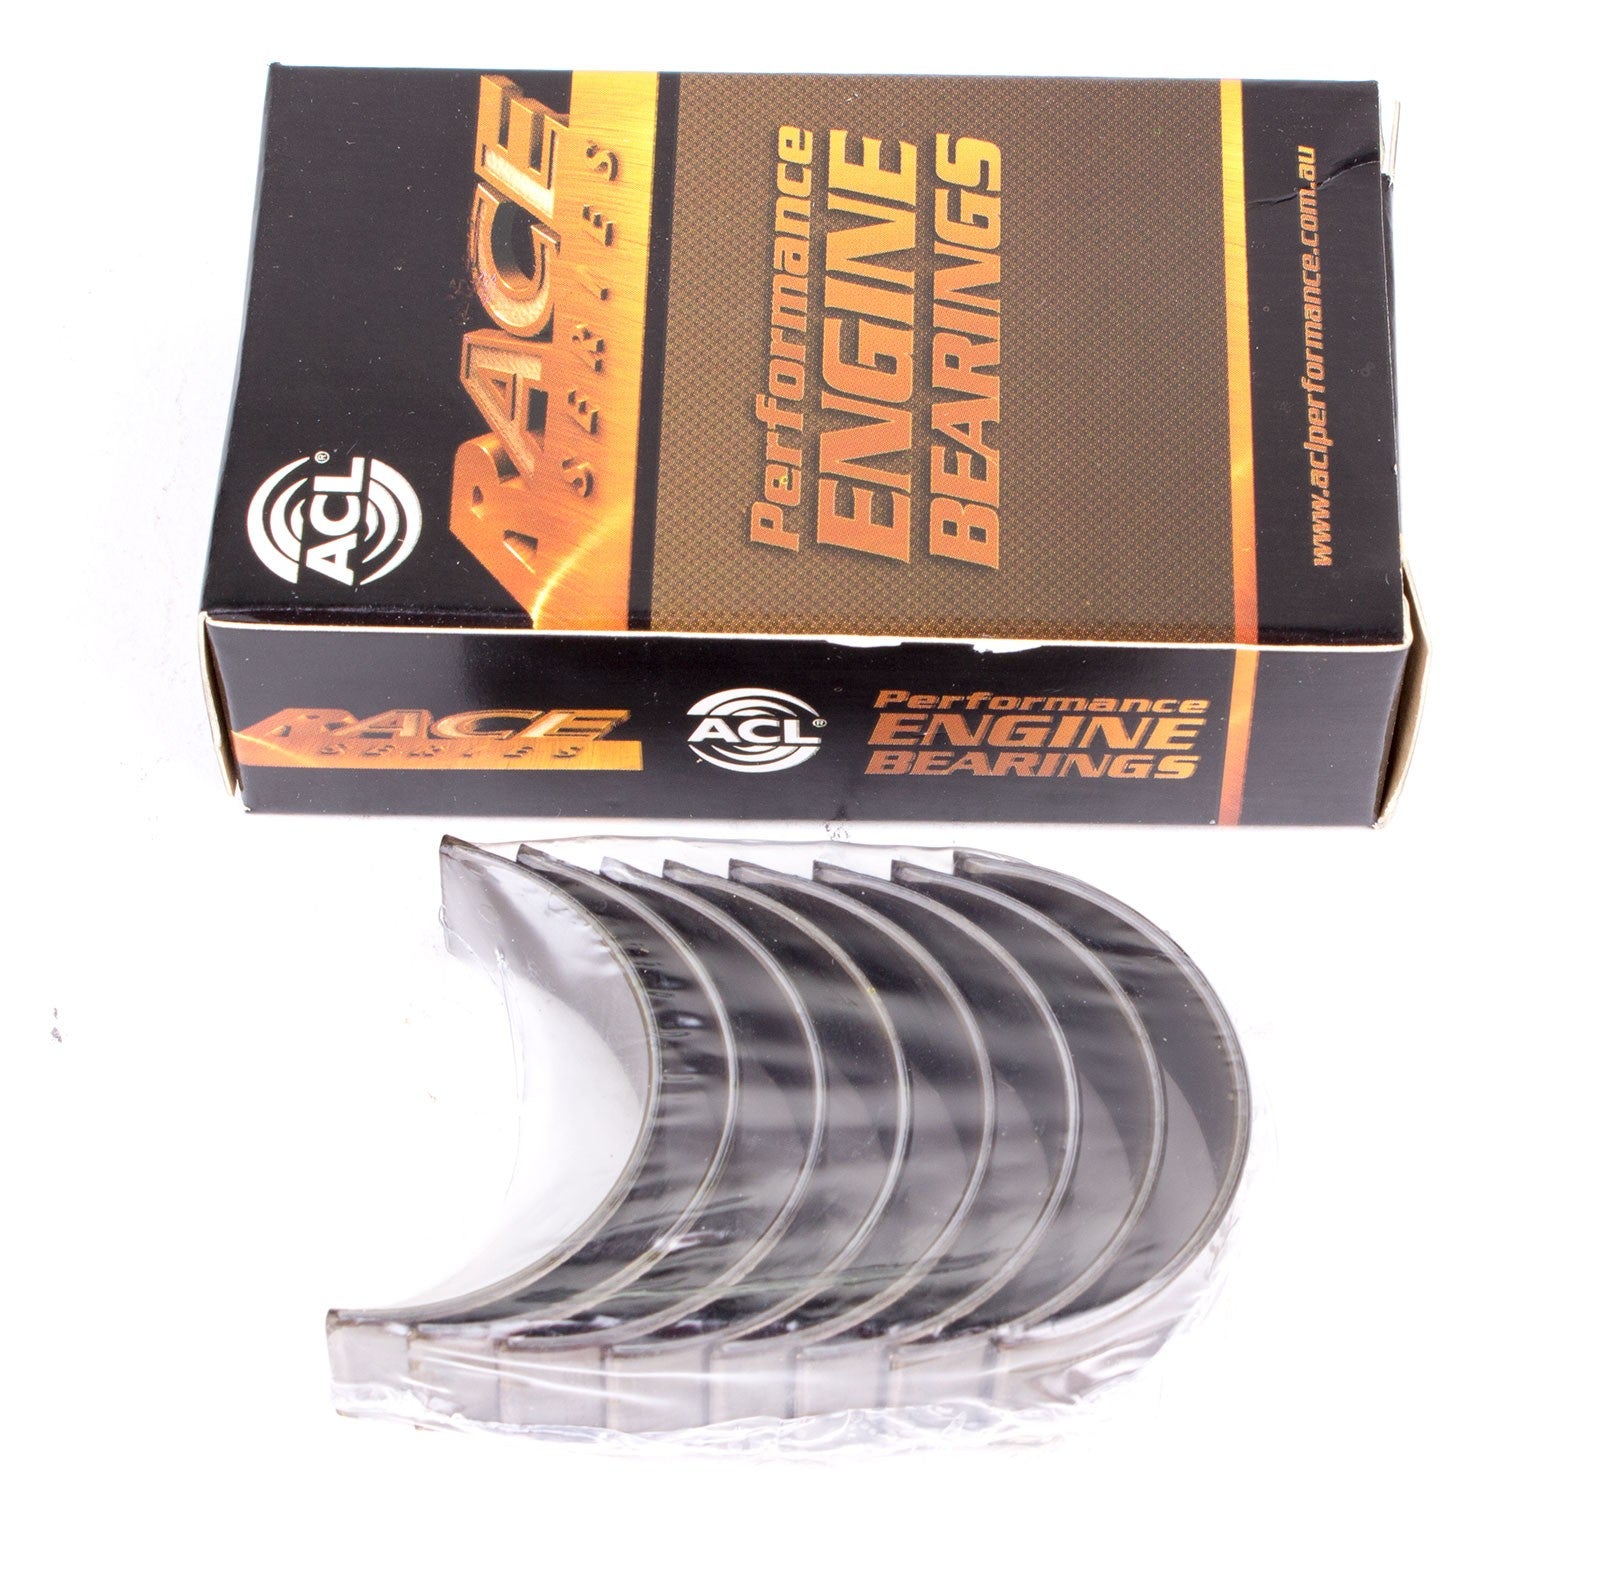 ACL 7M2158H-020 Main bearing set (ACL Race Series) Photo-0 